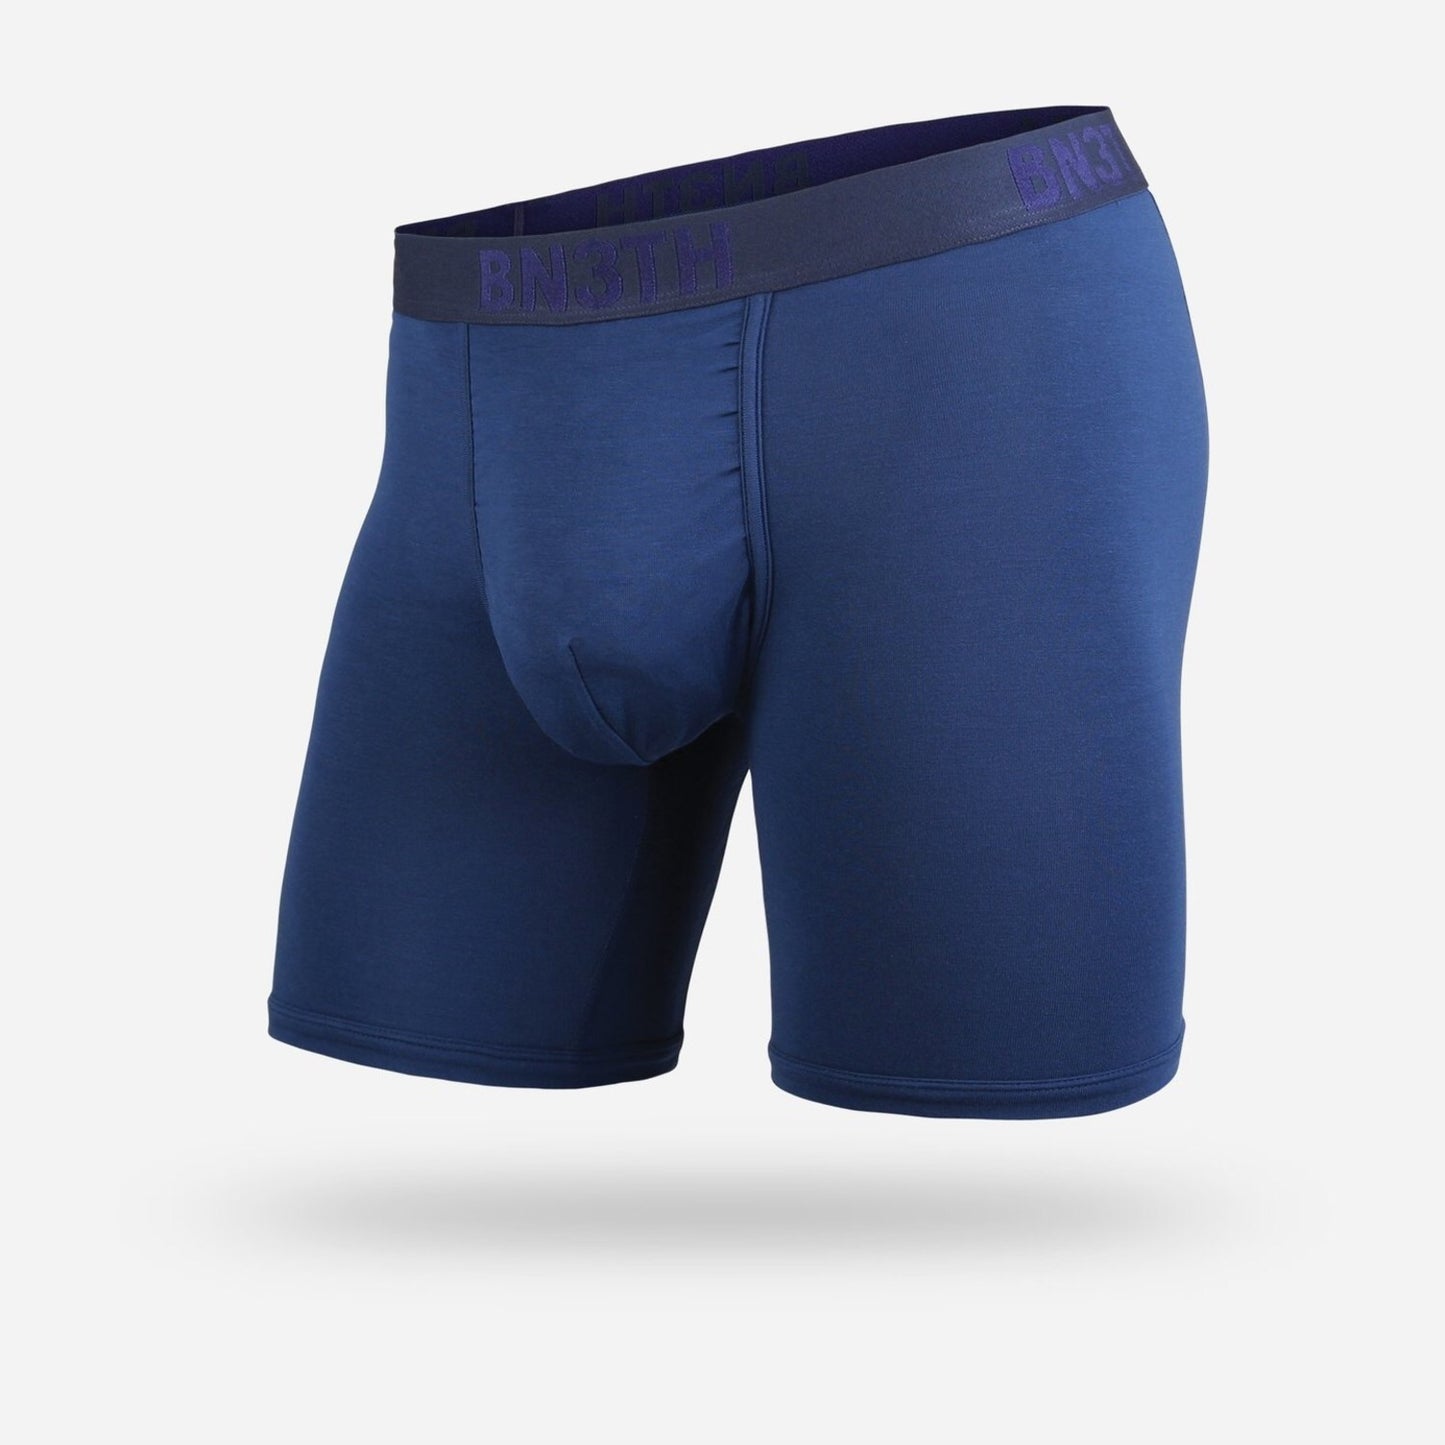 BN3TH CLASSIC BOXER BRIEF WITH FLY NAVY M